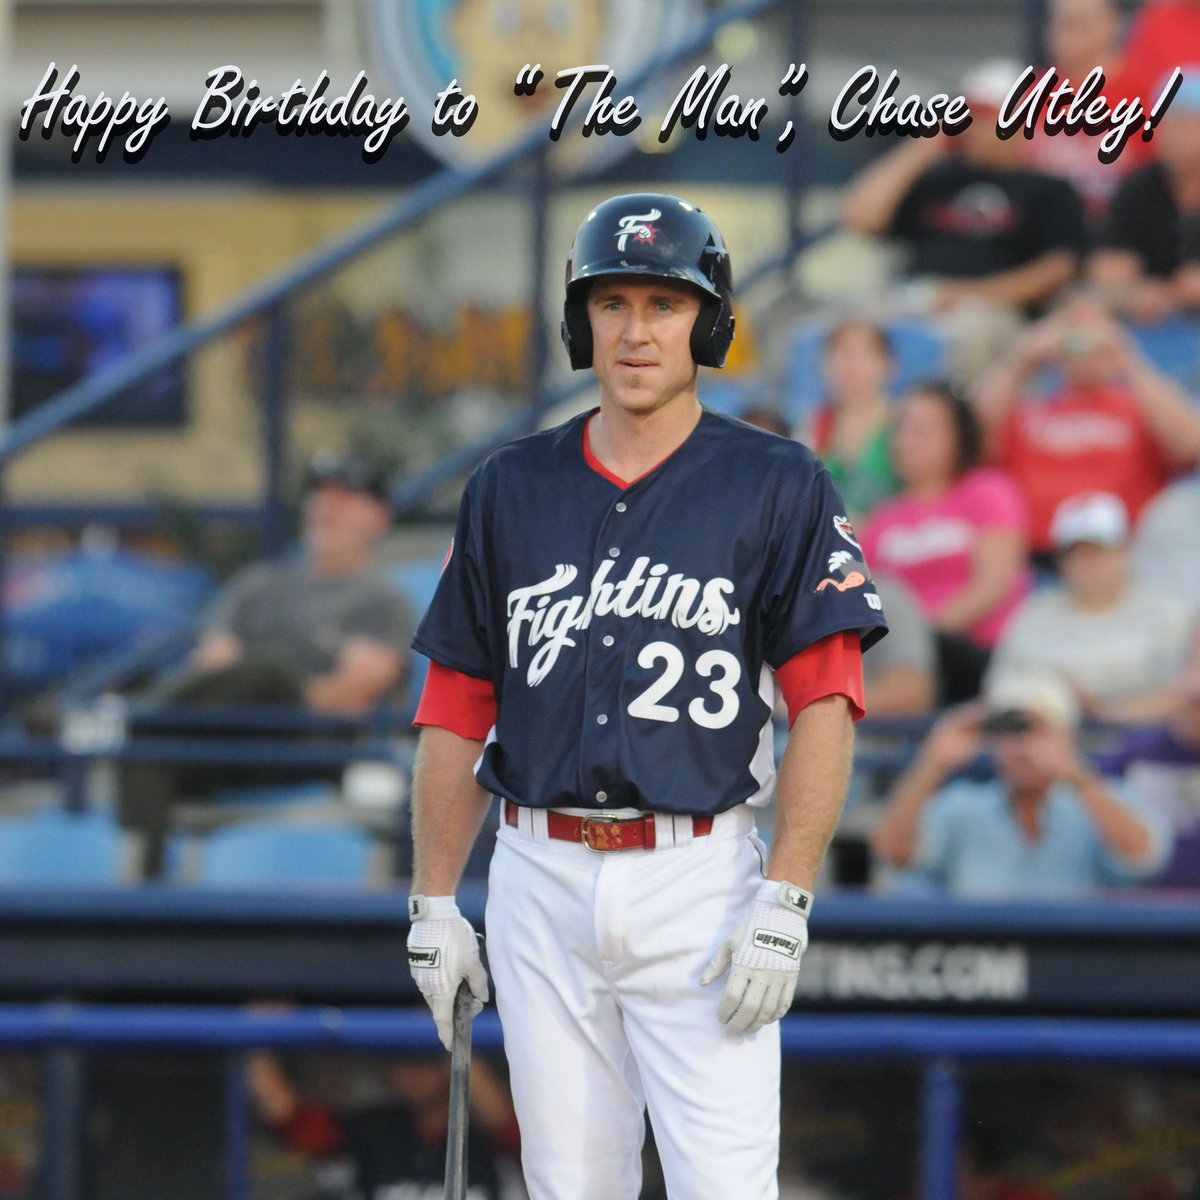 Reading Fightin Phils on X: Happy Birthday to The Man Chase